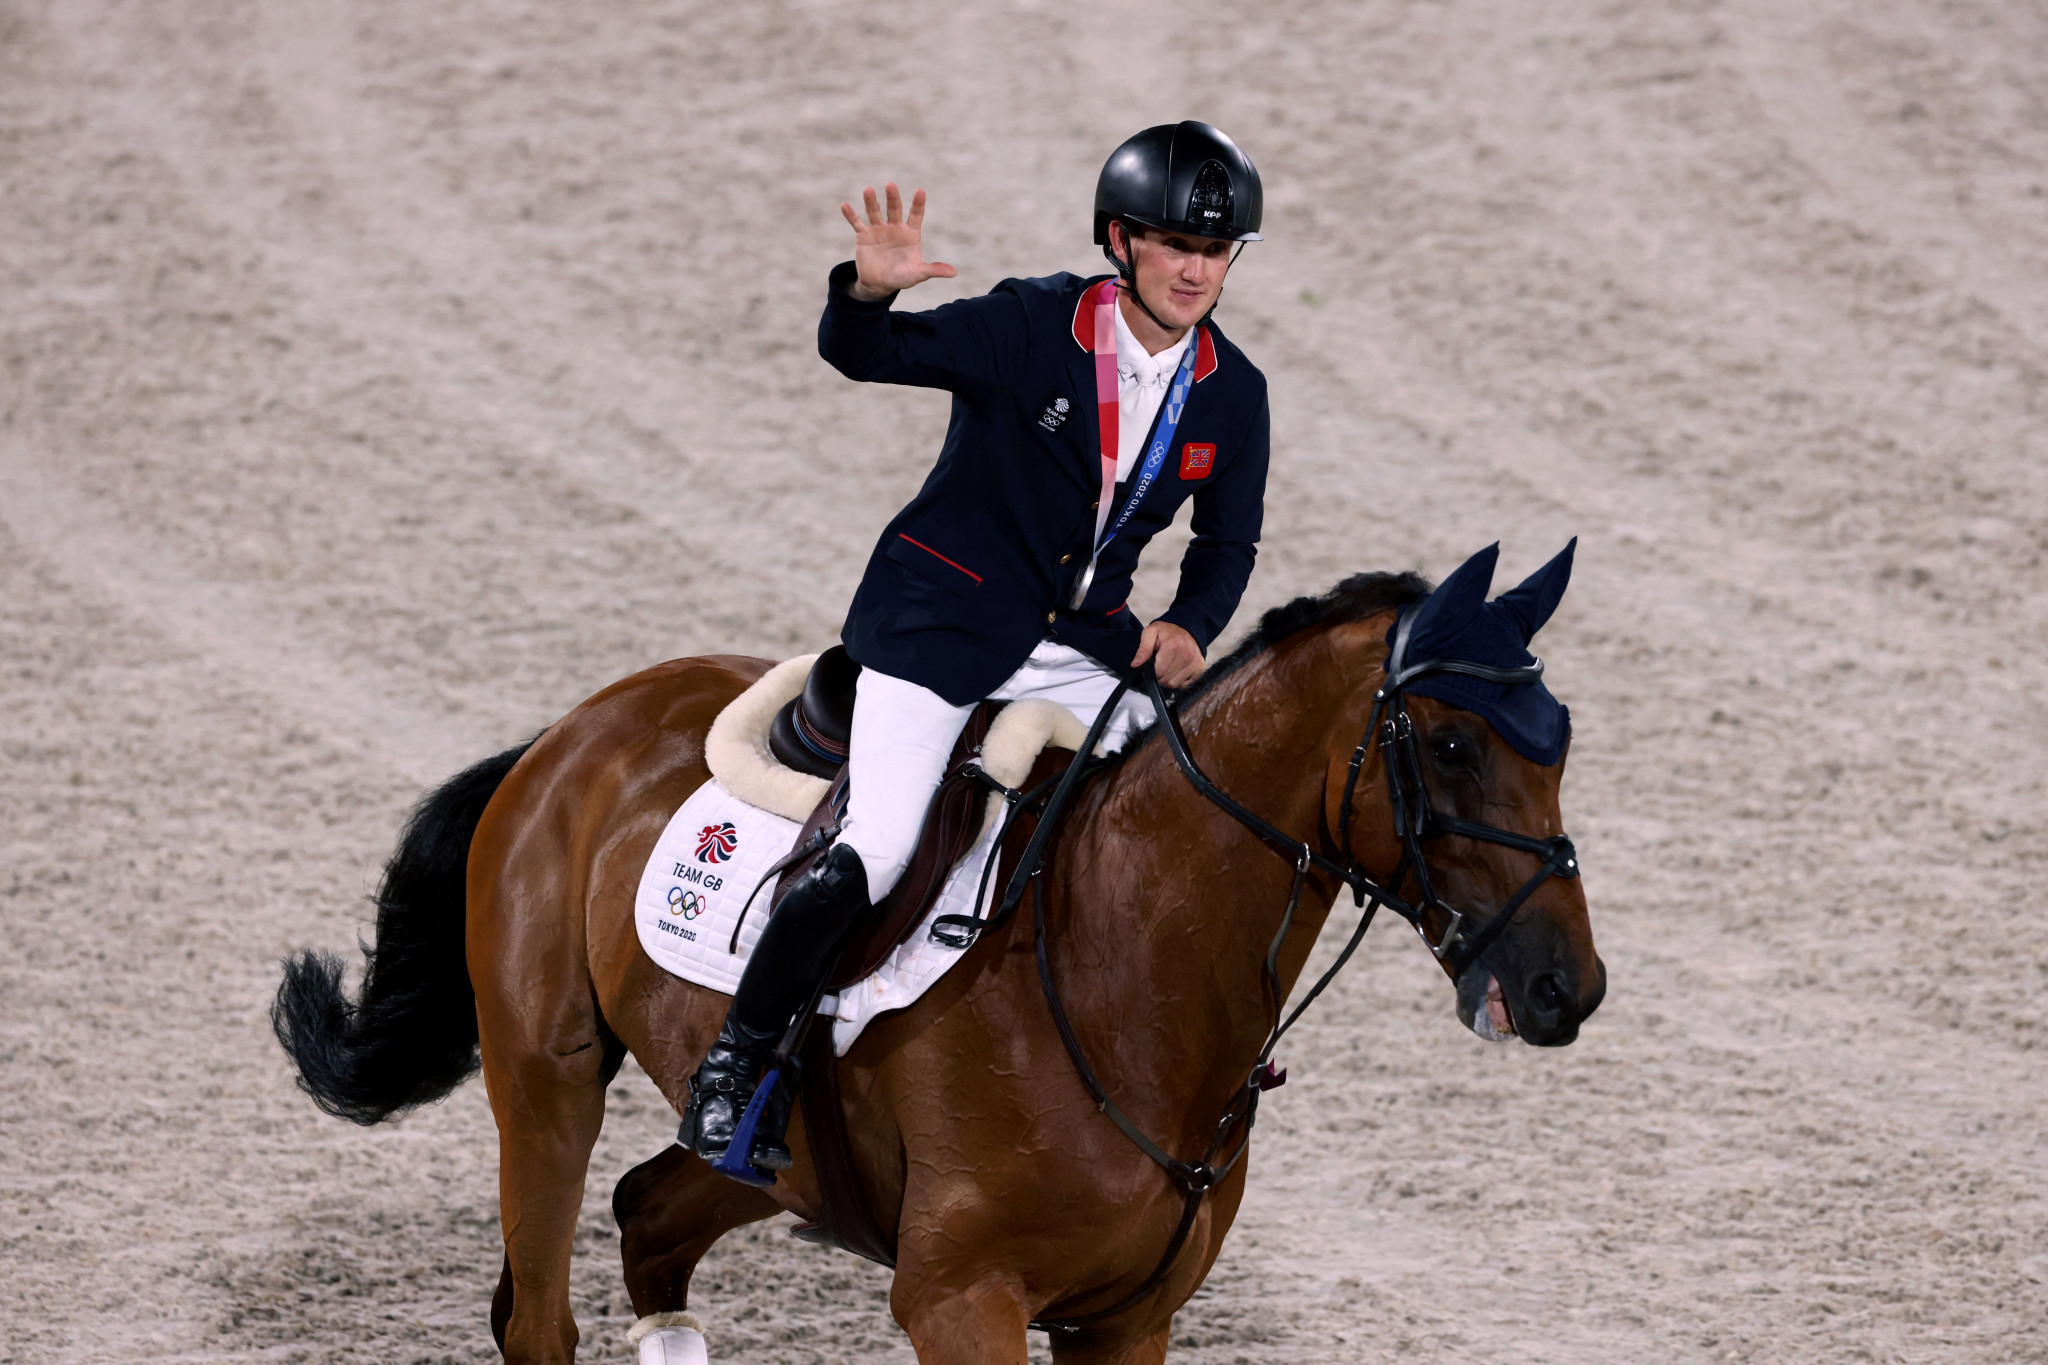 Olympic medallist McEwen leads Badminton Horse Trials after day one